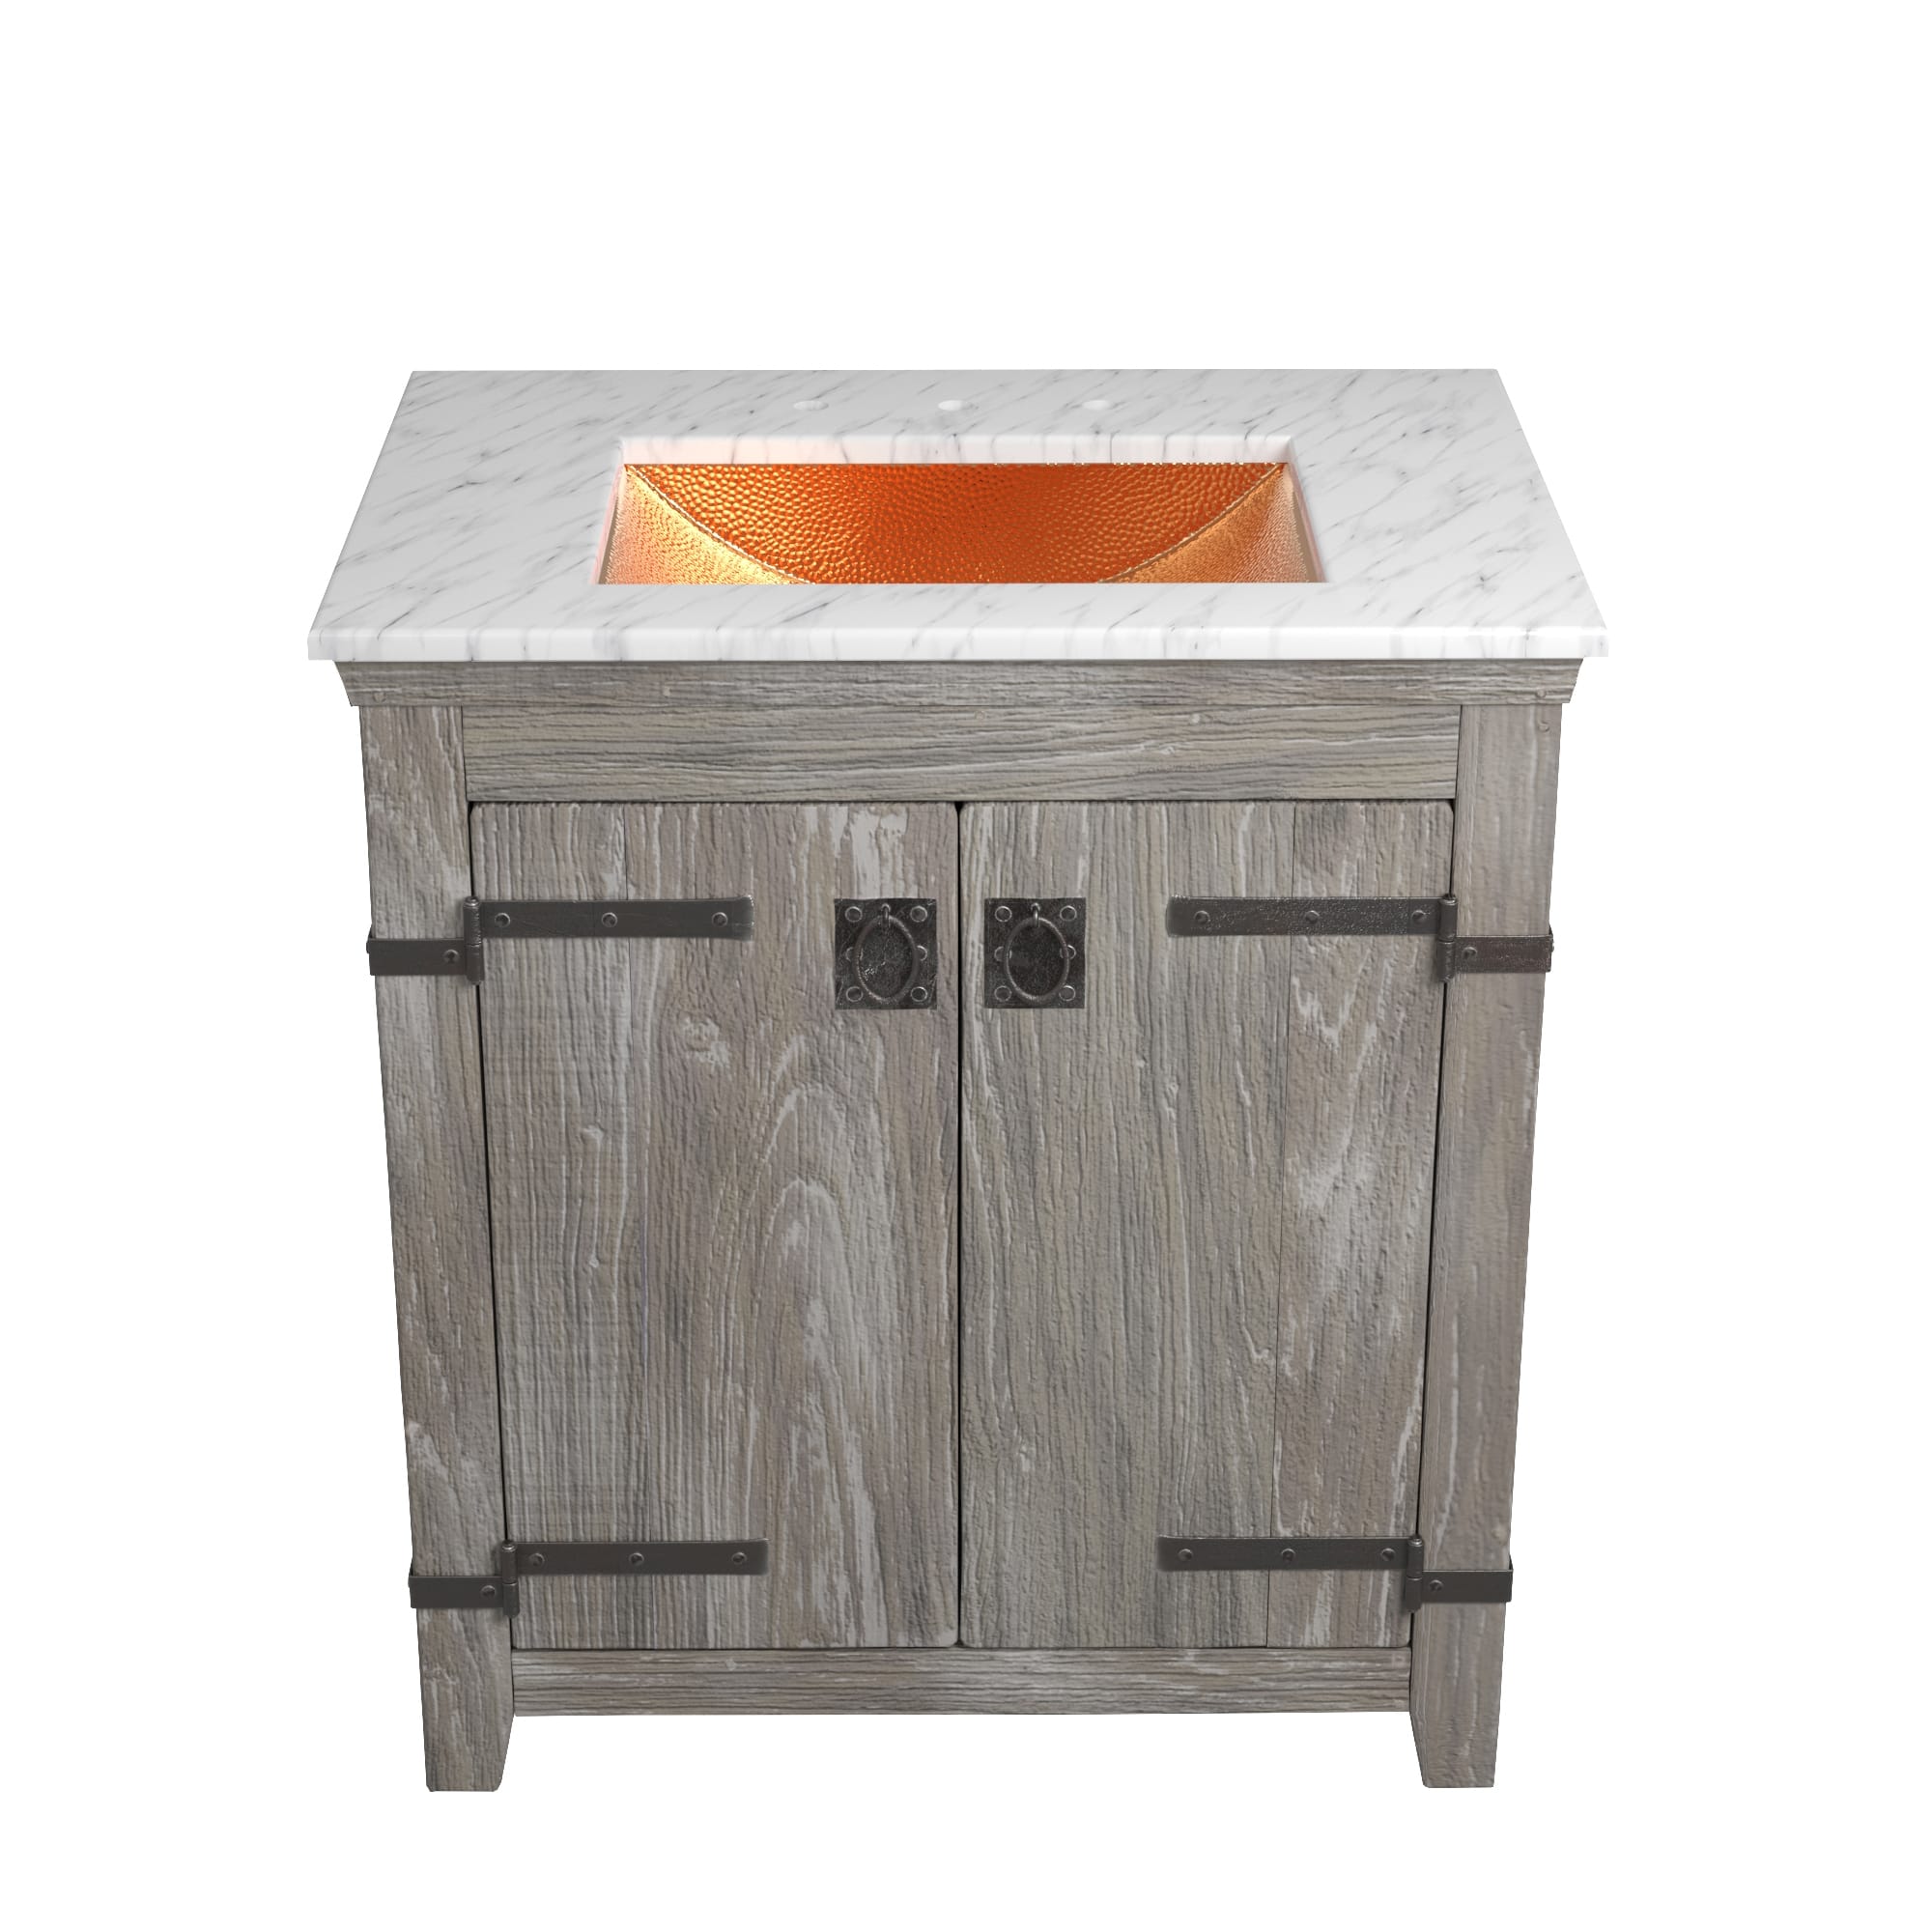 Native Trails 30" Americana Vanity in Driftwood with Carrara Marble Top and Avila in Polished Copper, 8" Widespread Faucet Holes, BND30-VB-CT-CP-016